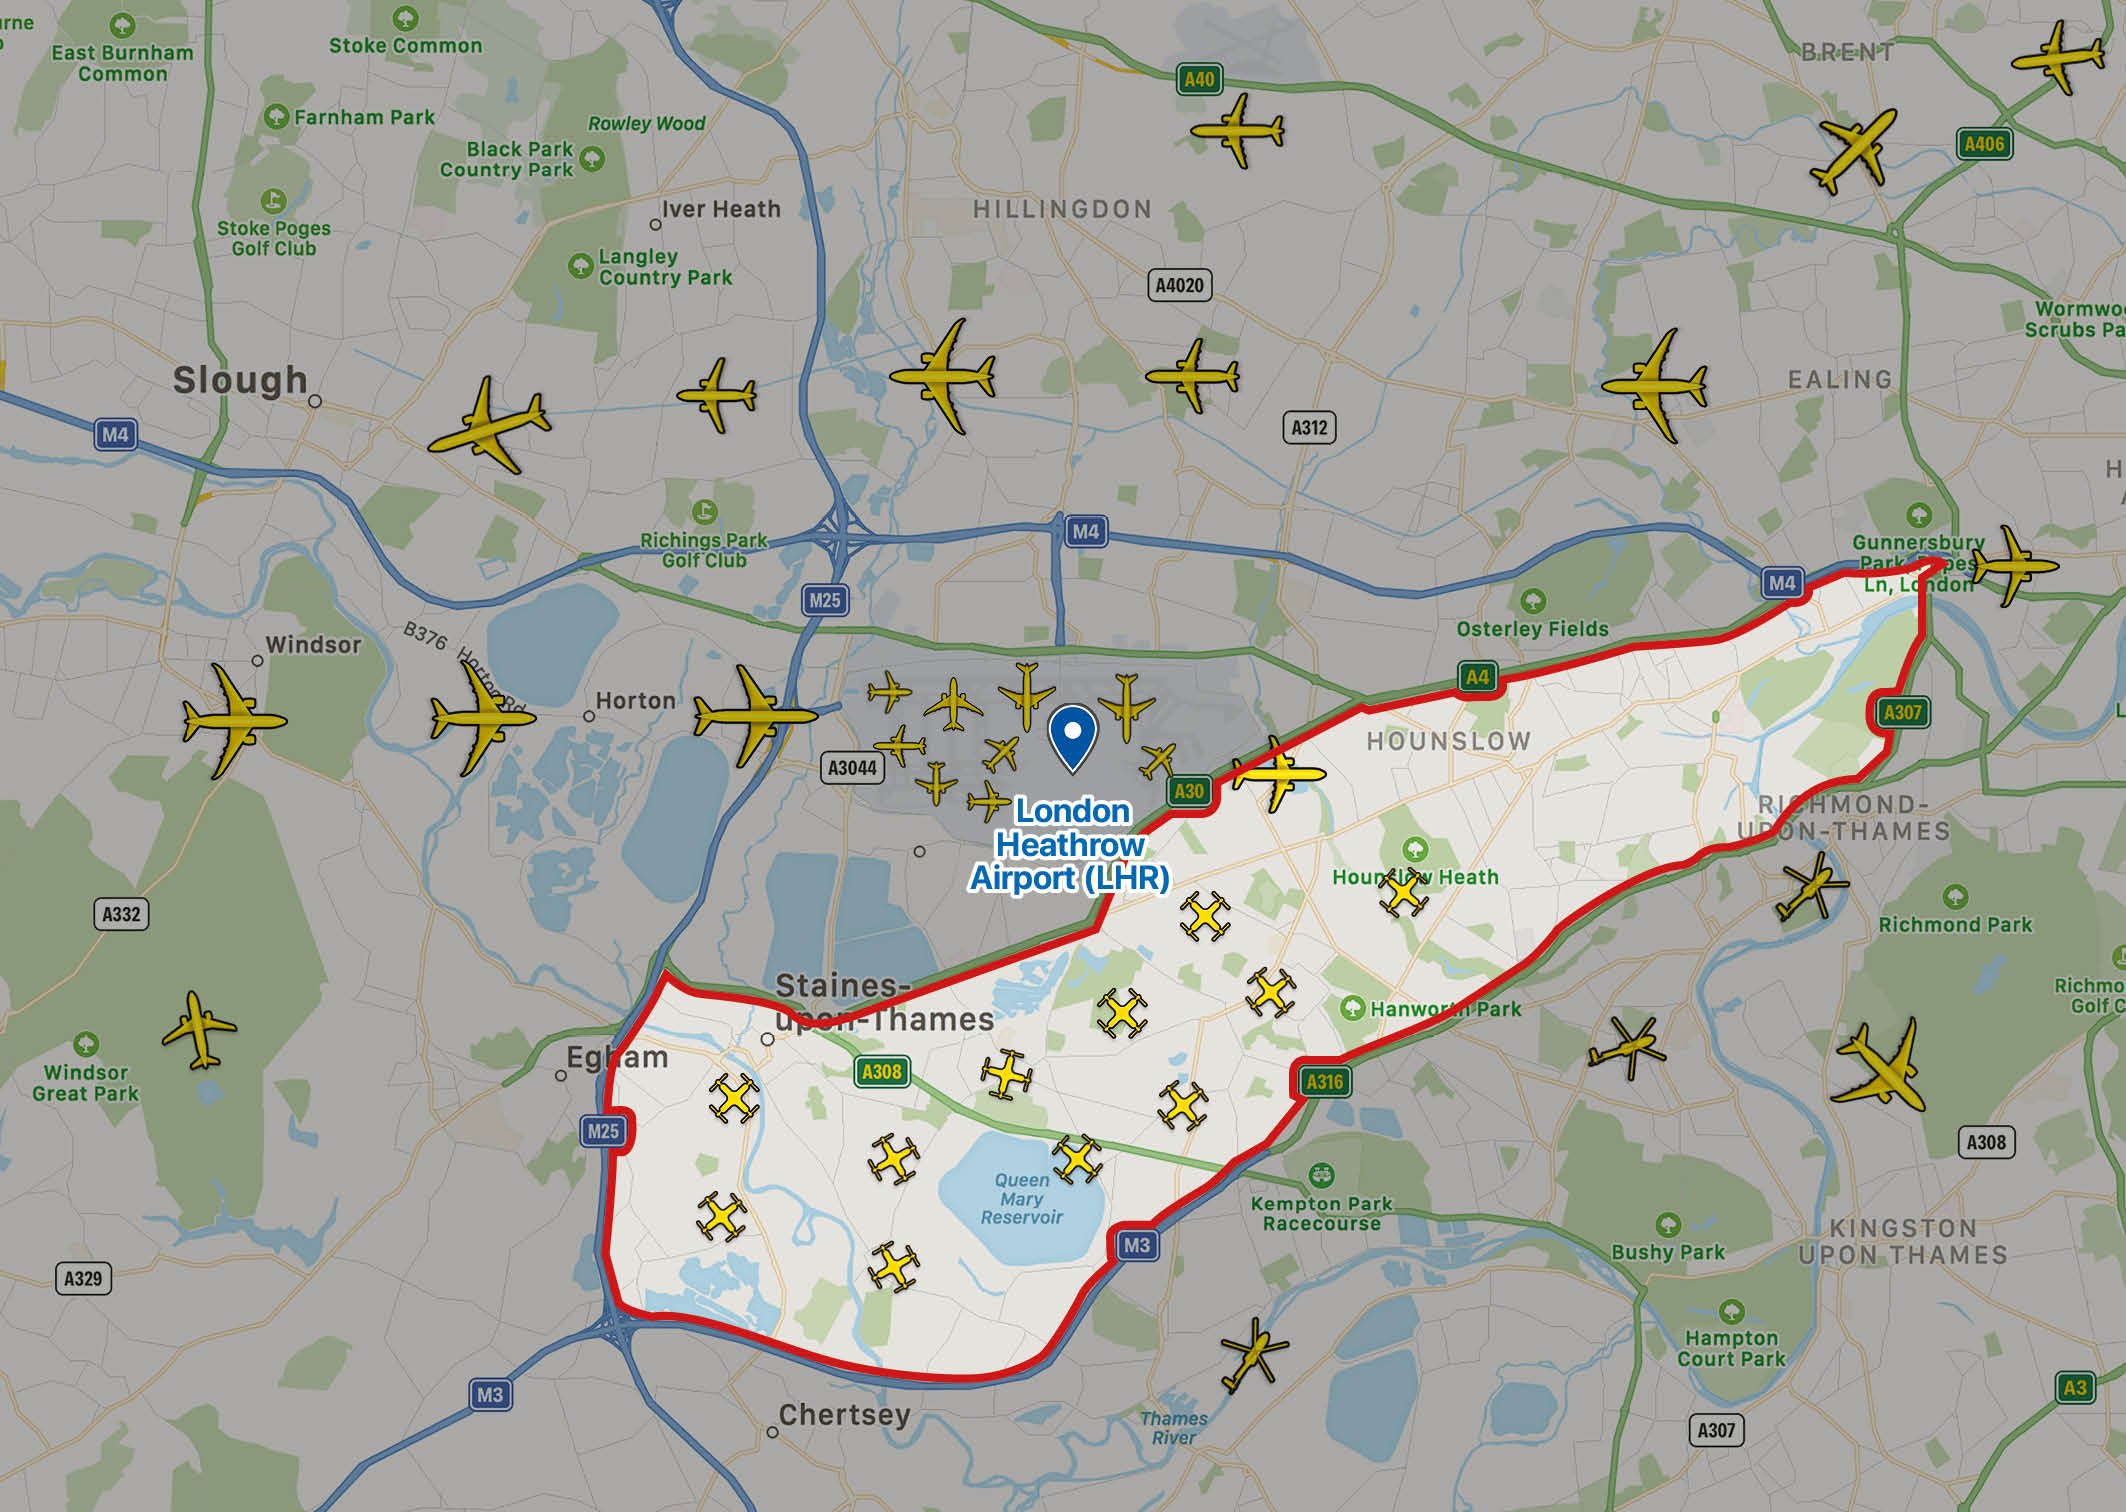 Drones operating in close proximity to an international airport, integrated into air traffic management system